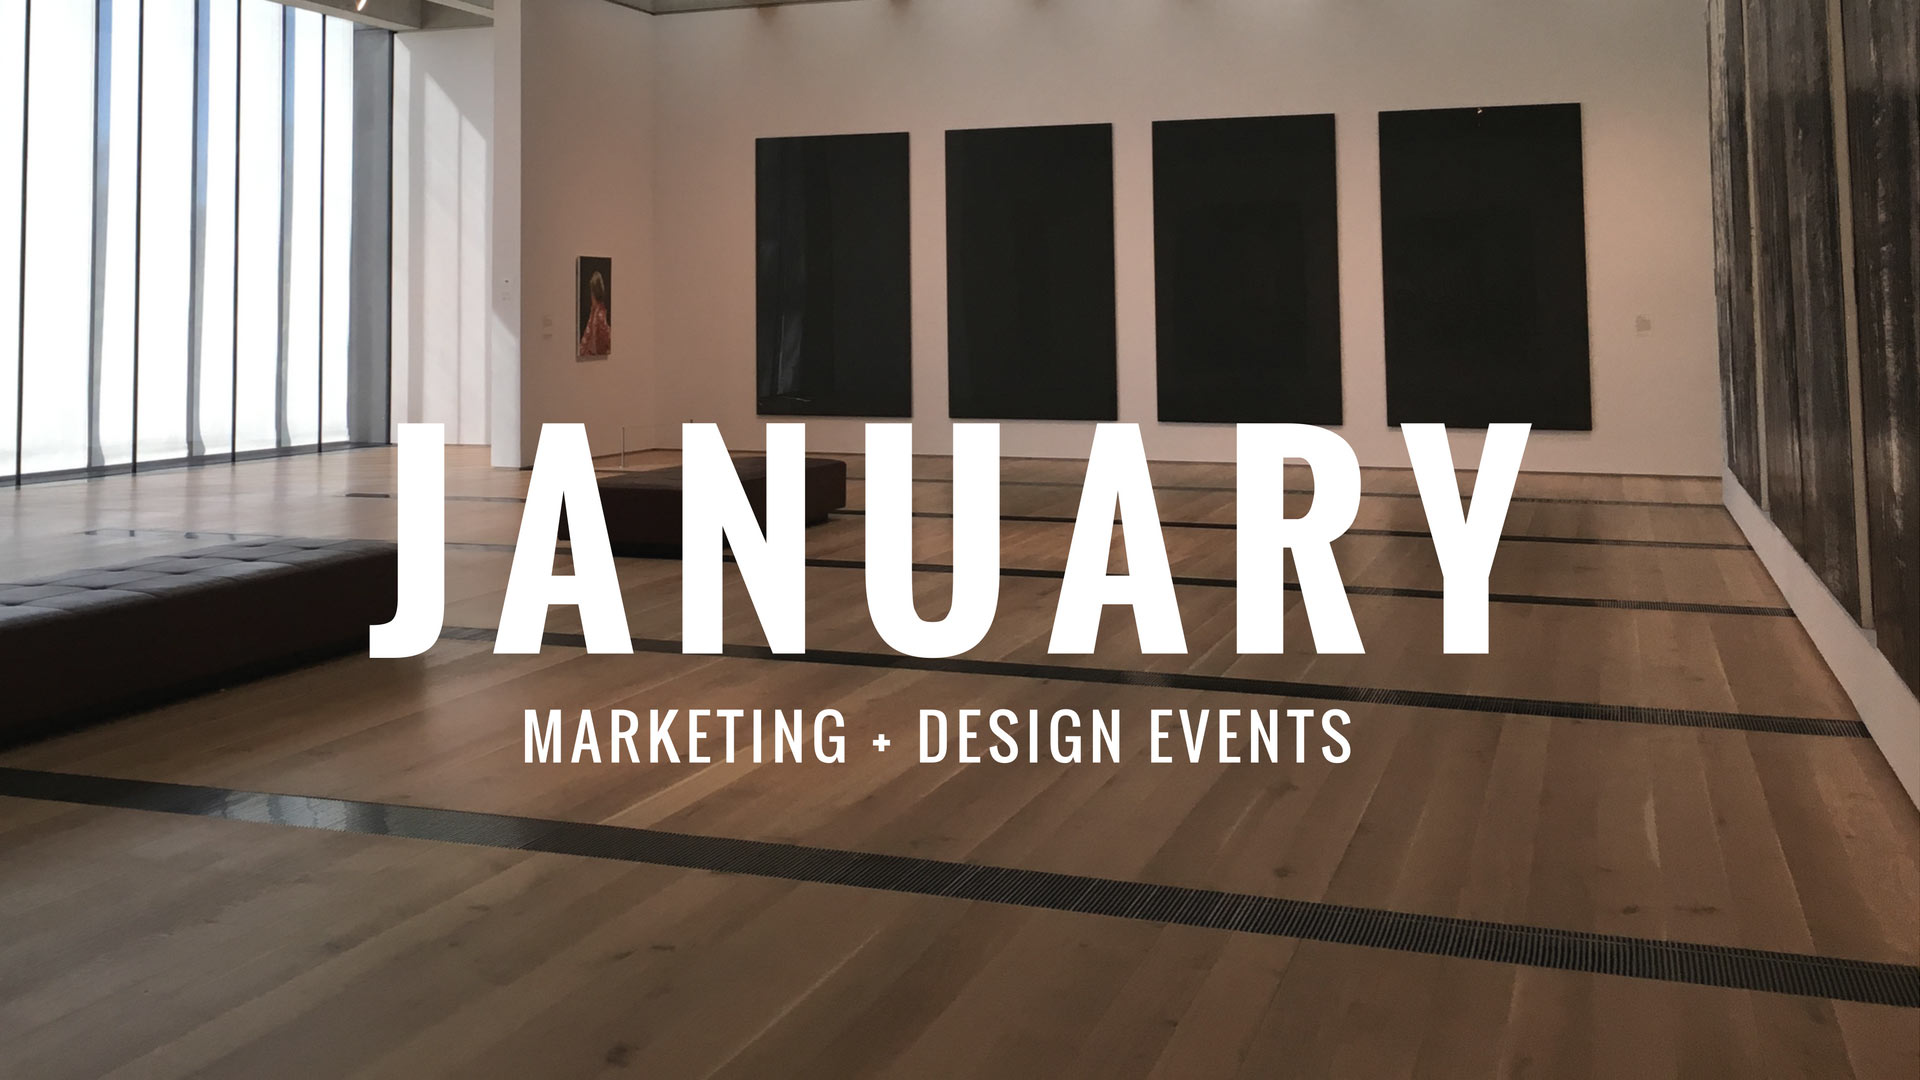 January 2017 Marketing and Design Events in St. Louis